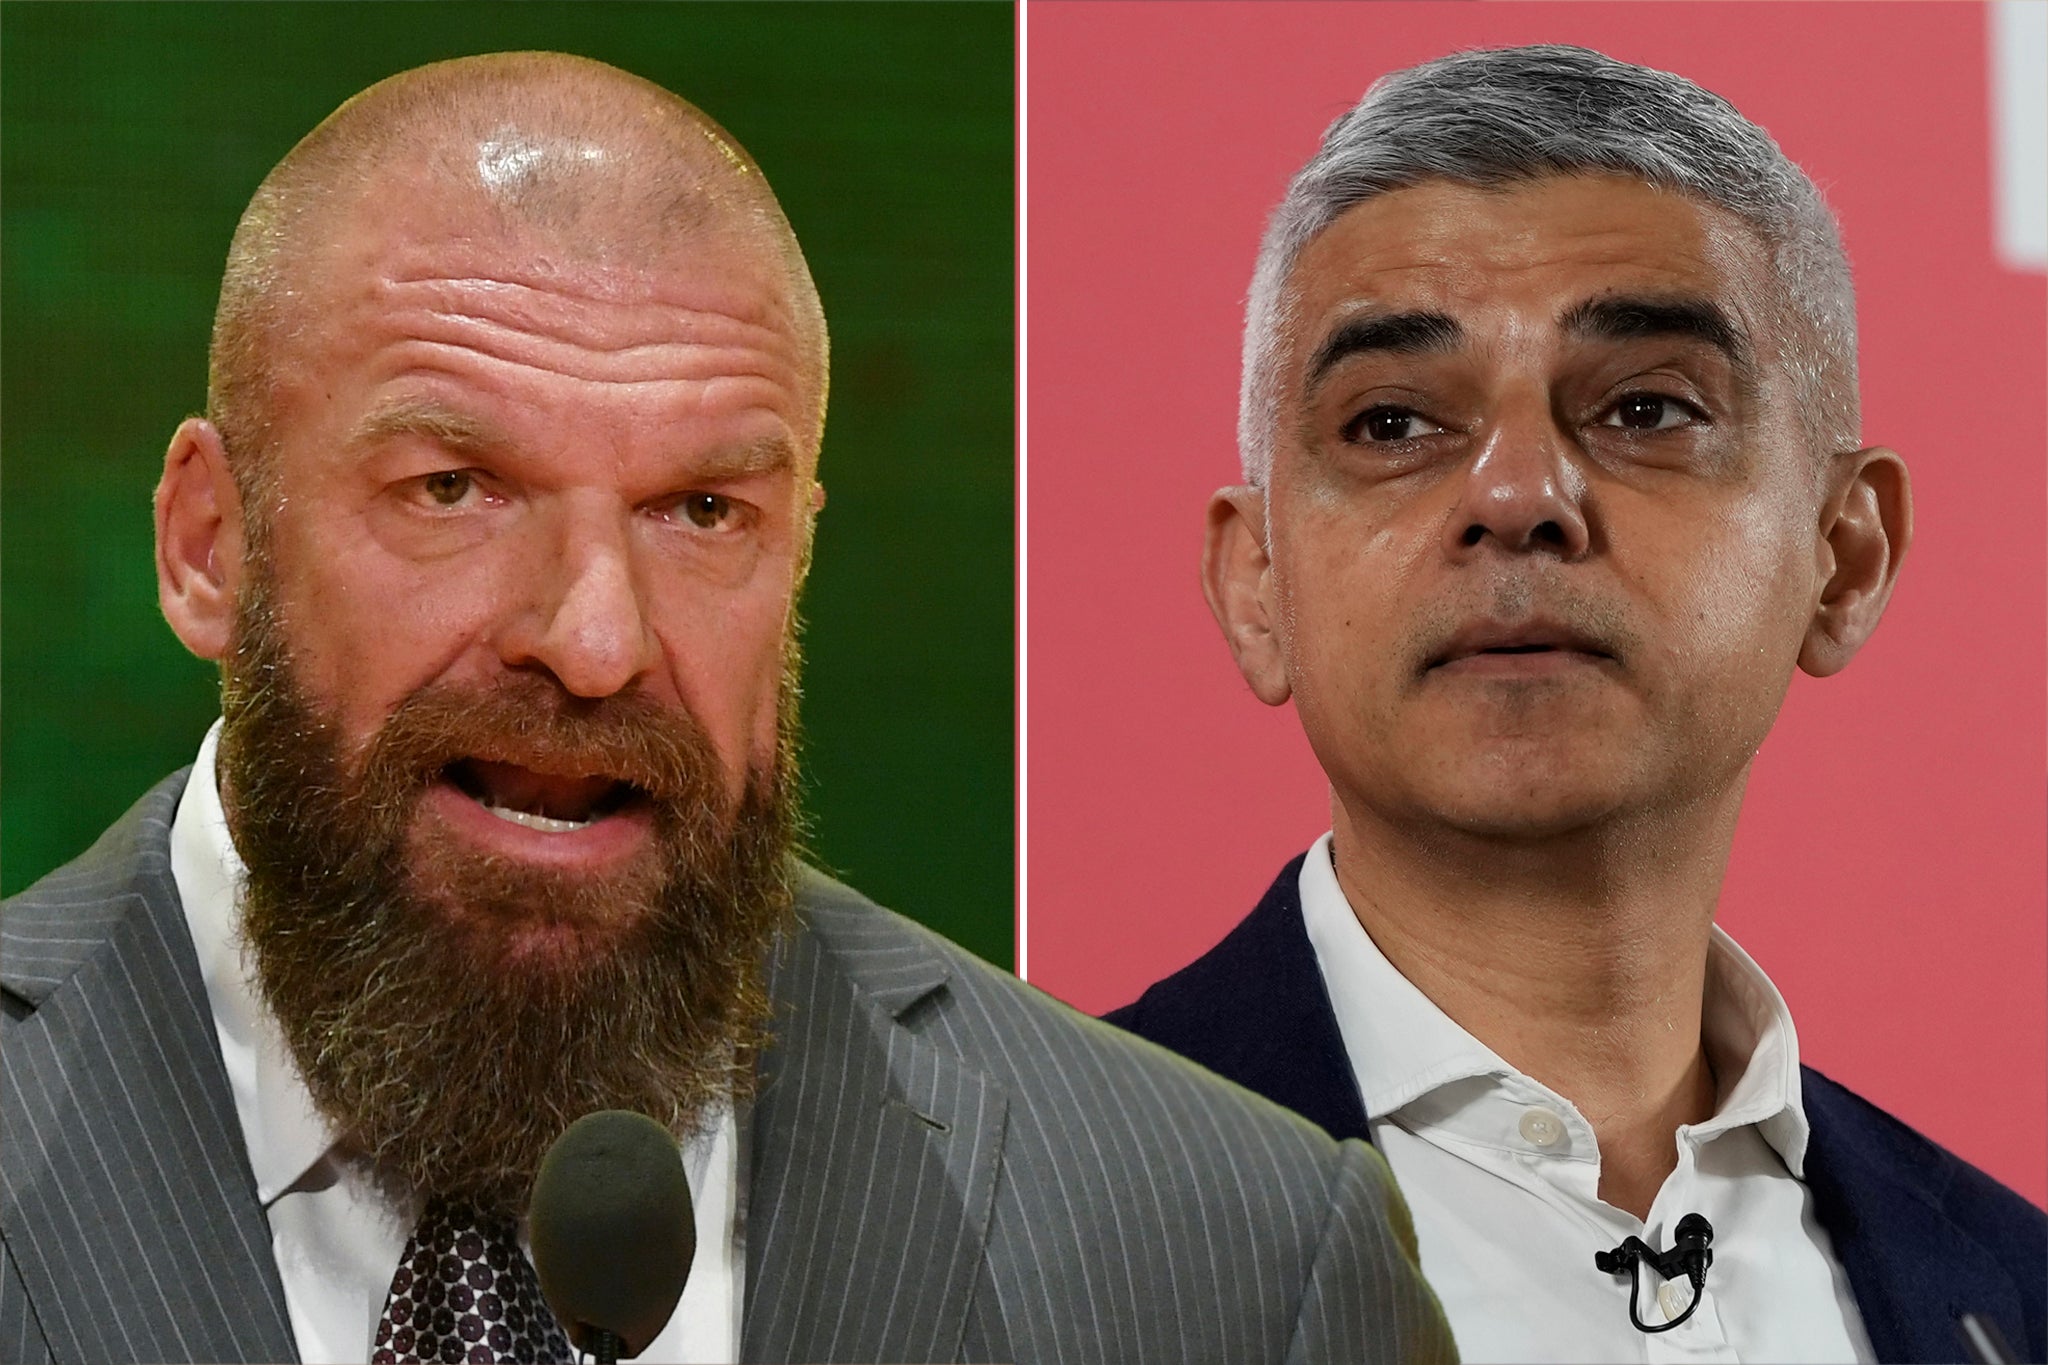 Paul ‘Triple H’ Levesque has reached out to Sadiq Khan about bringing WrestleMania to London